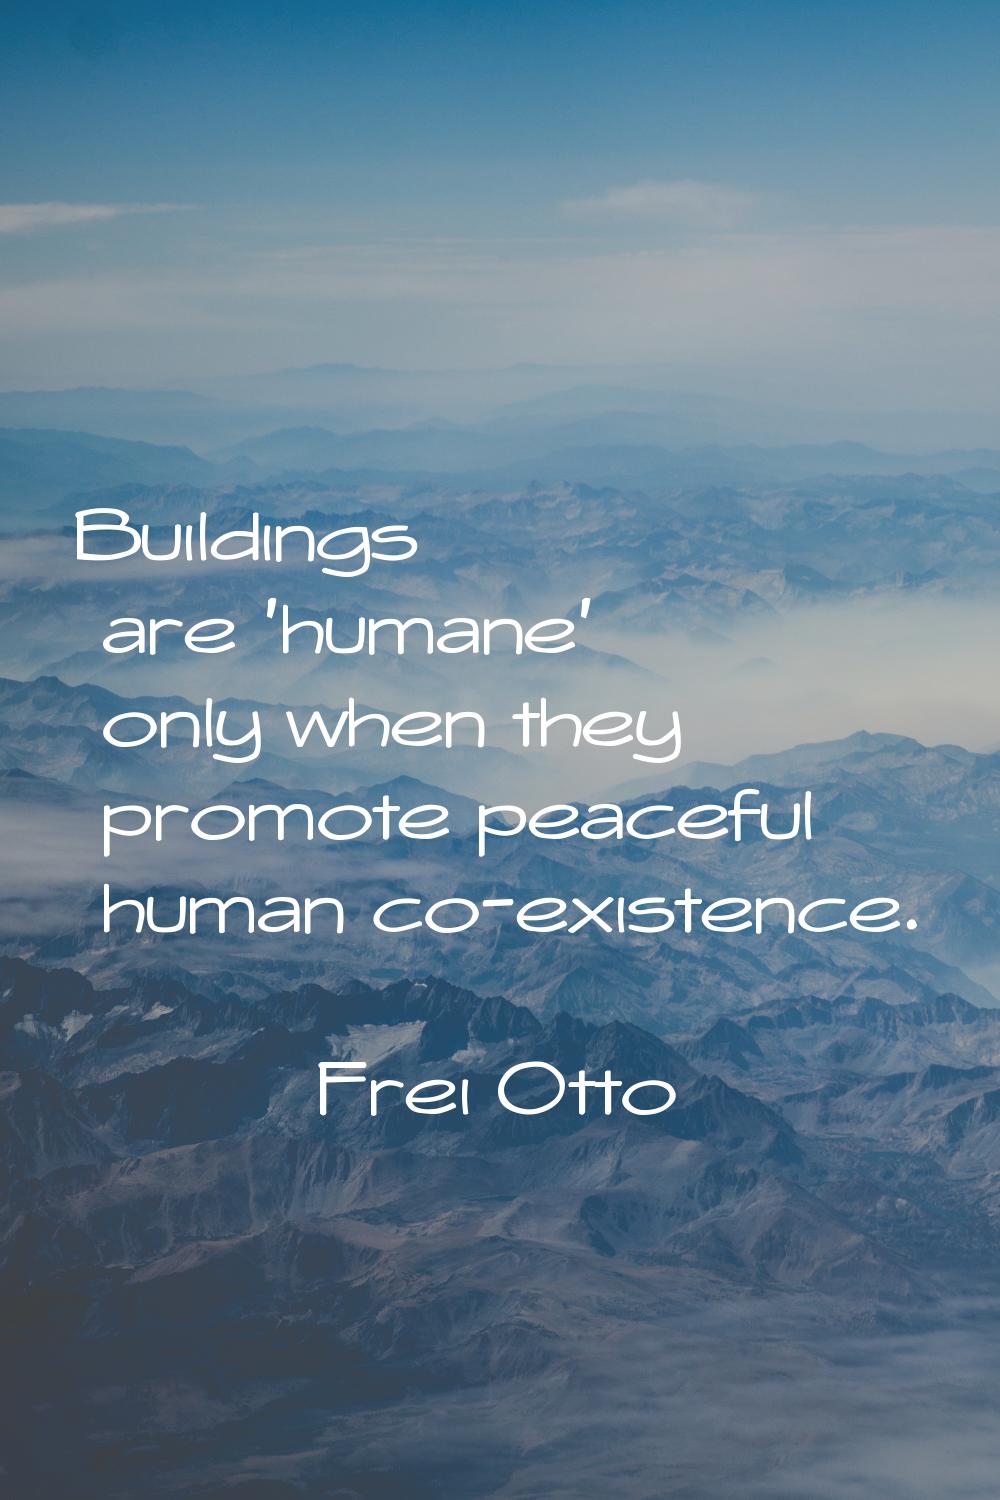 Buildings are 'humane' only when they promote peaceful human co-existence.